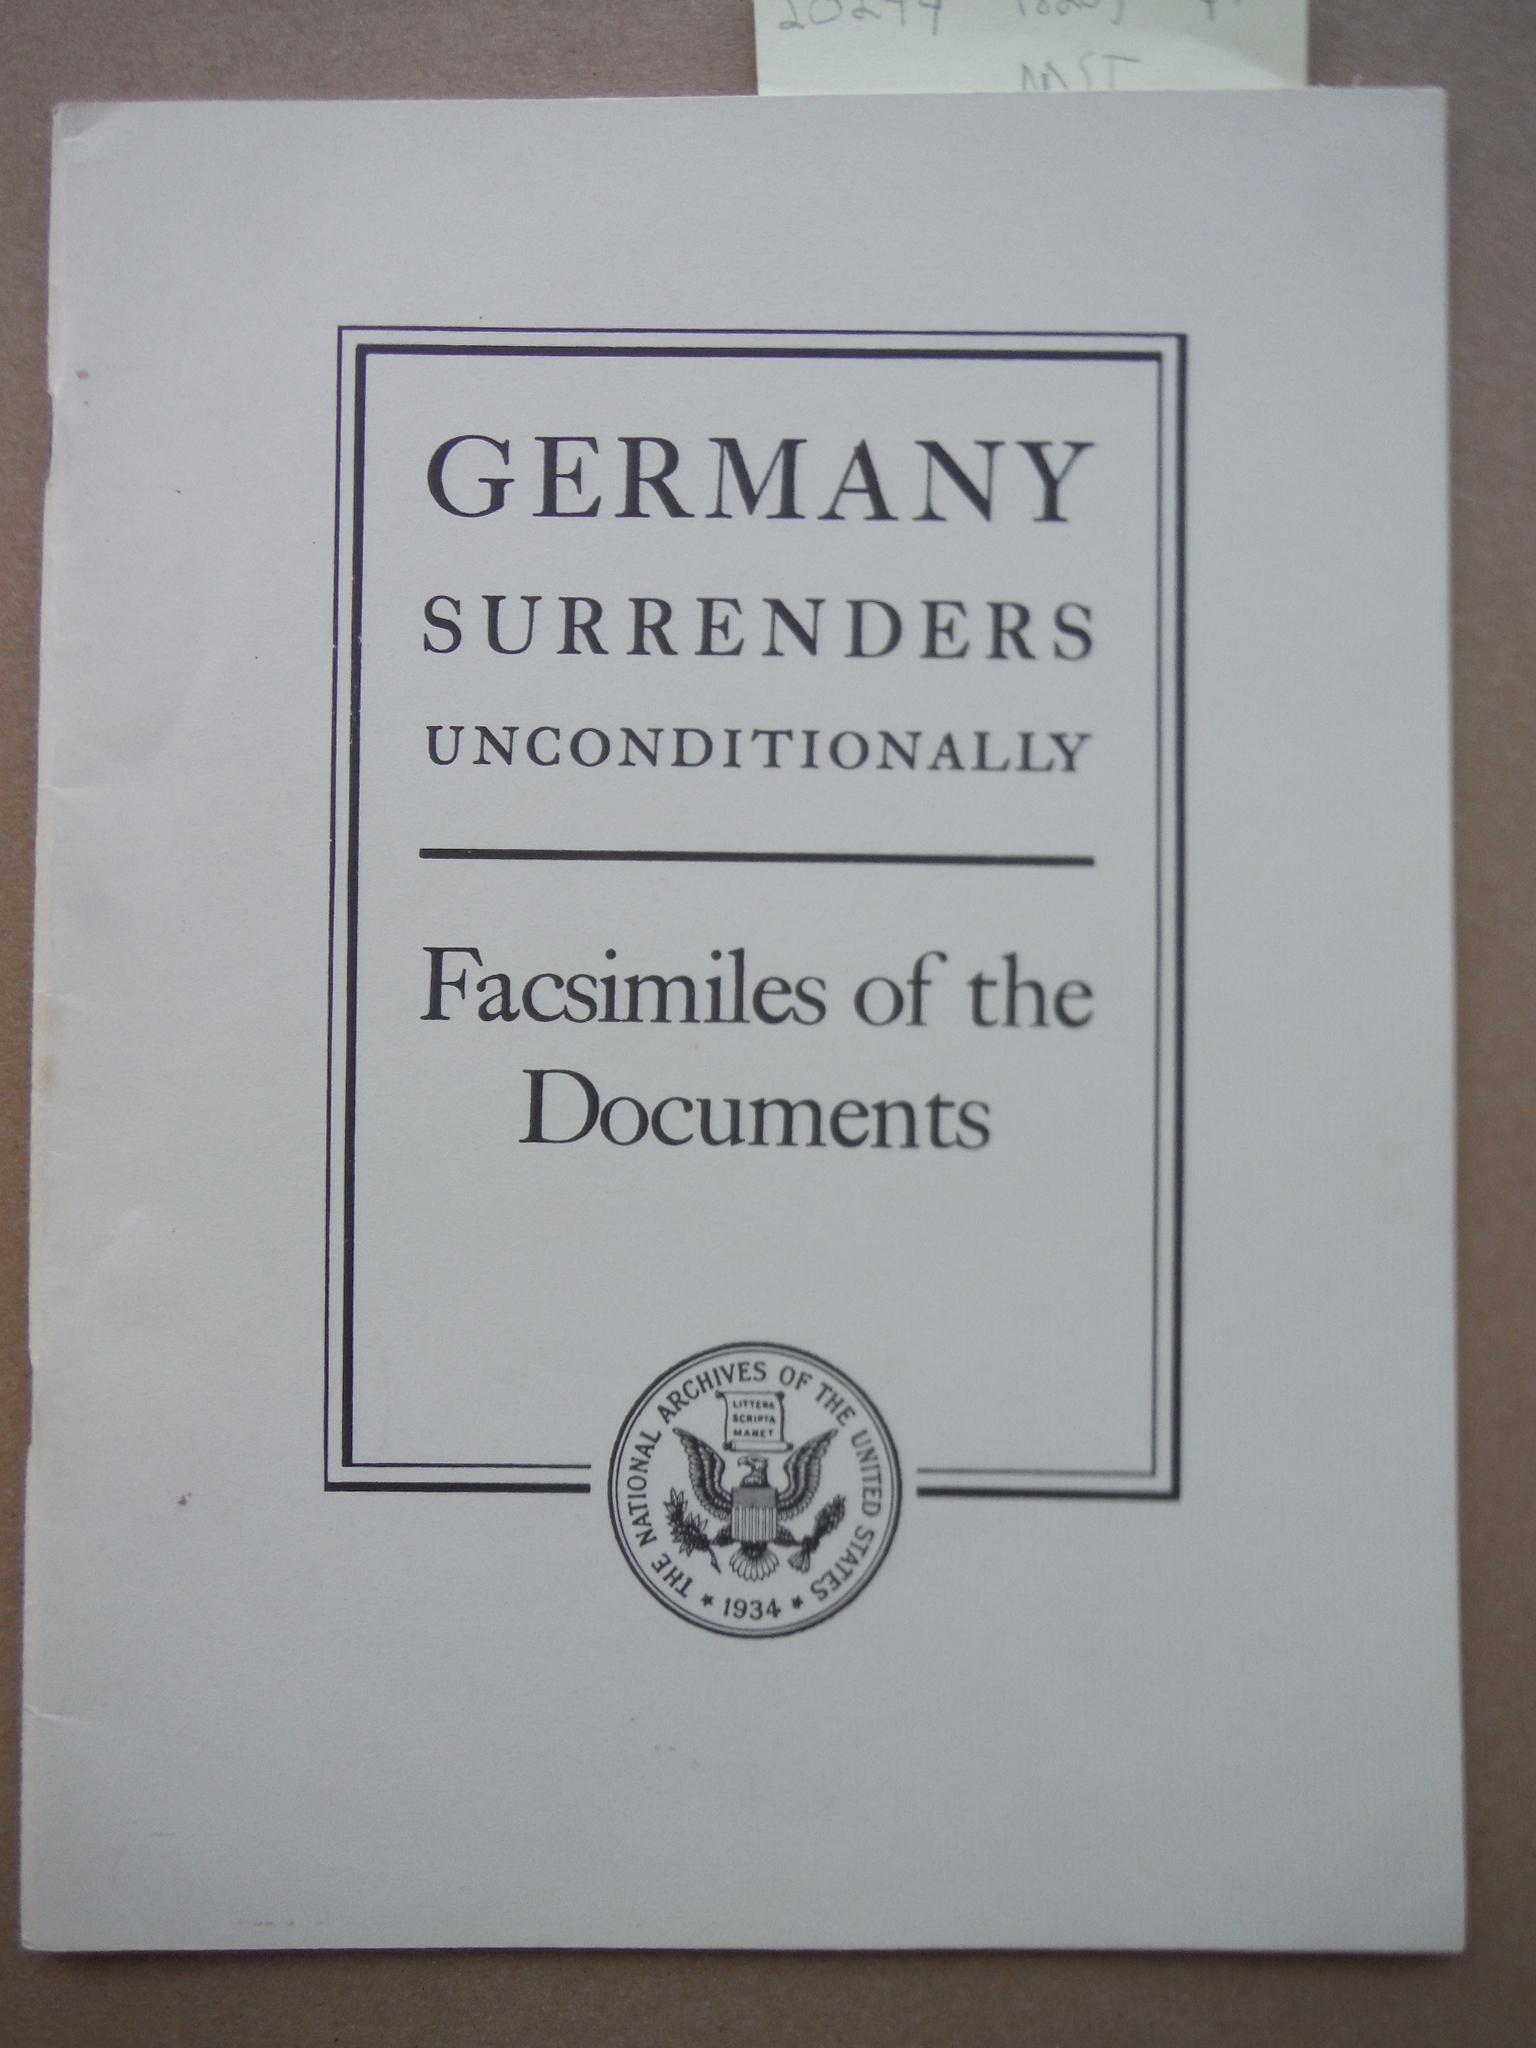 Image 0 of Germany Surrenders Unconditionally-Facsimilies of the Documents